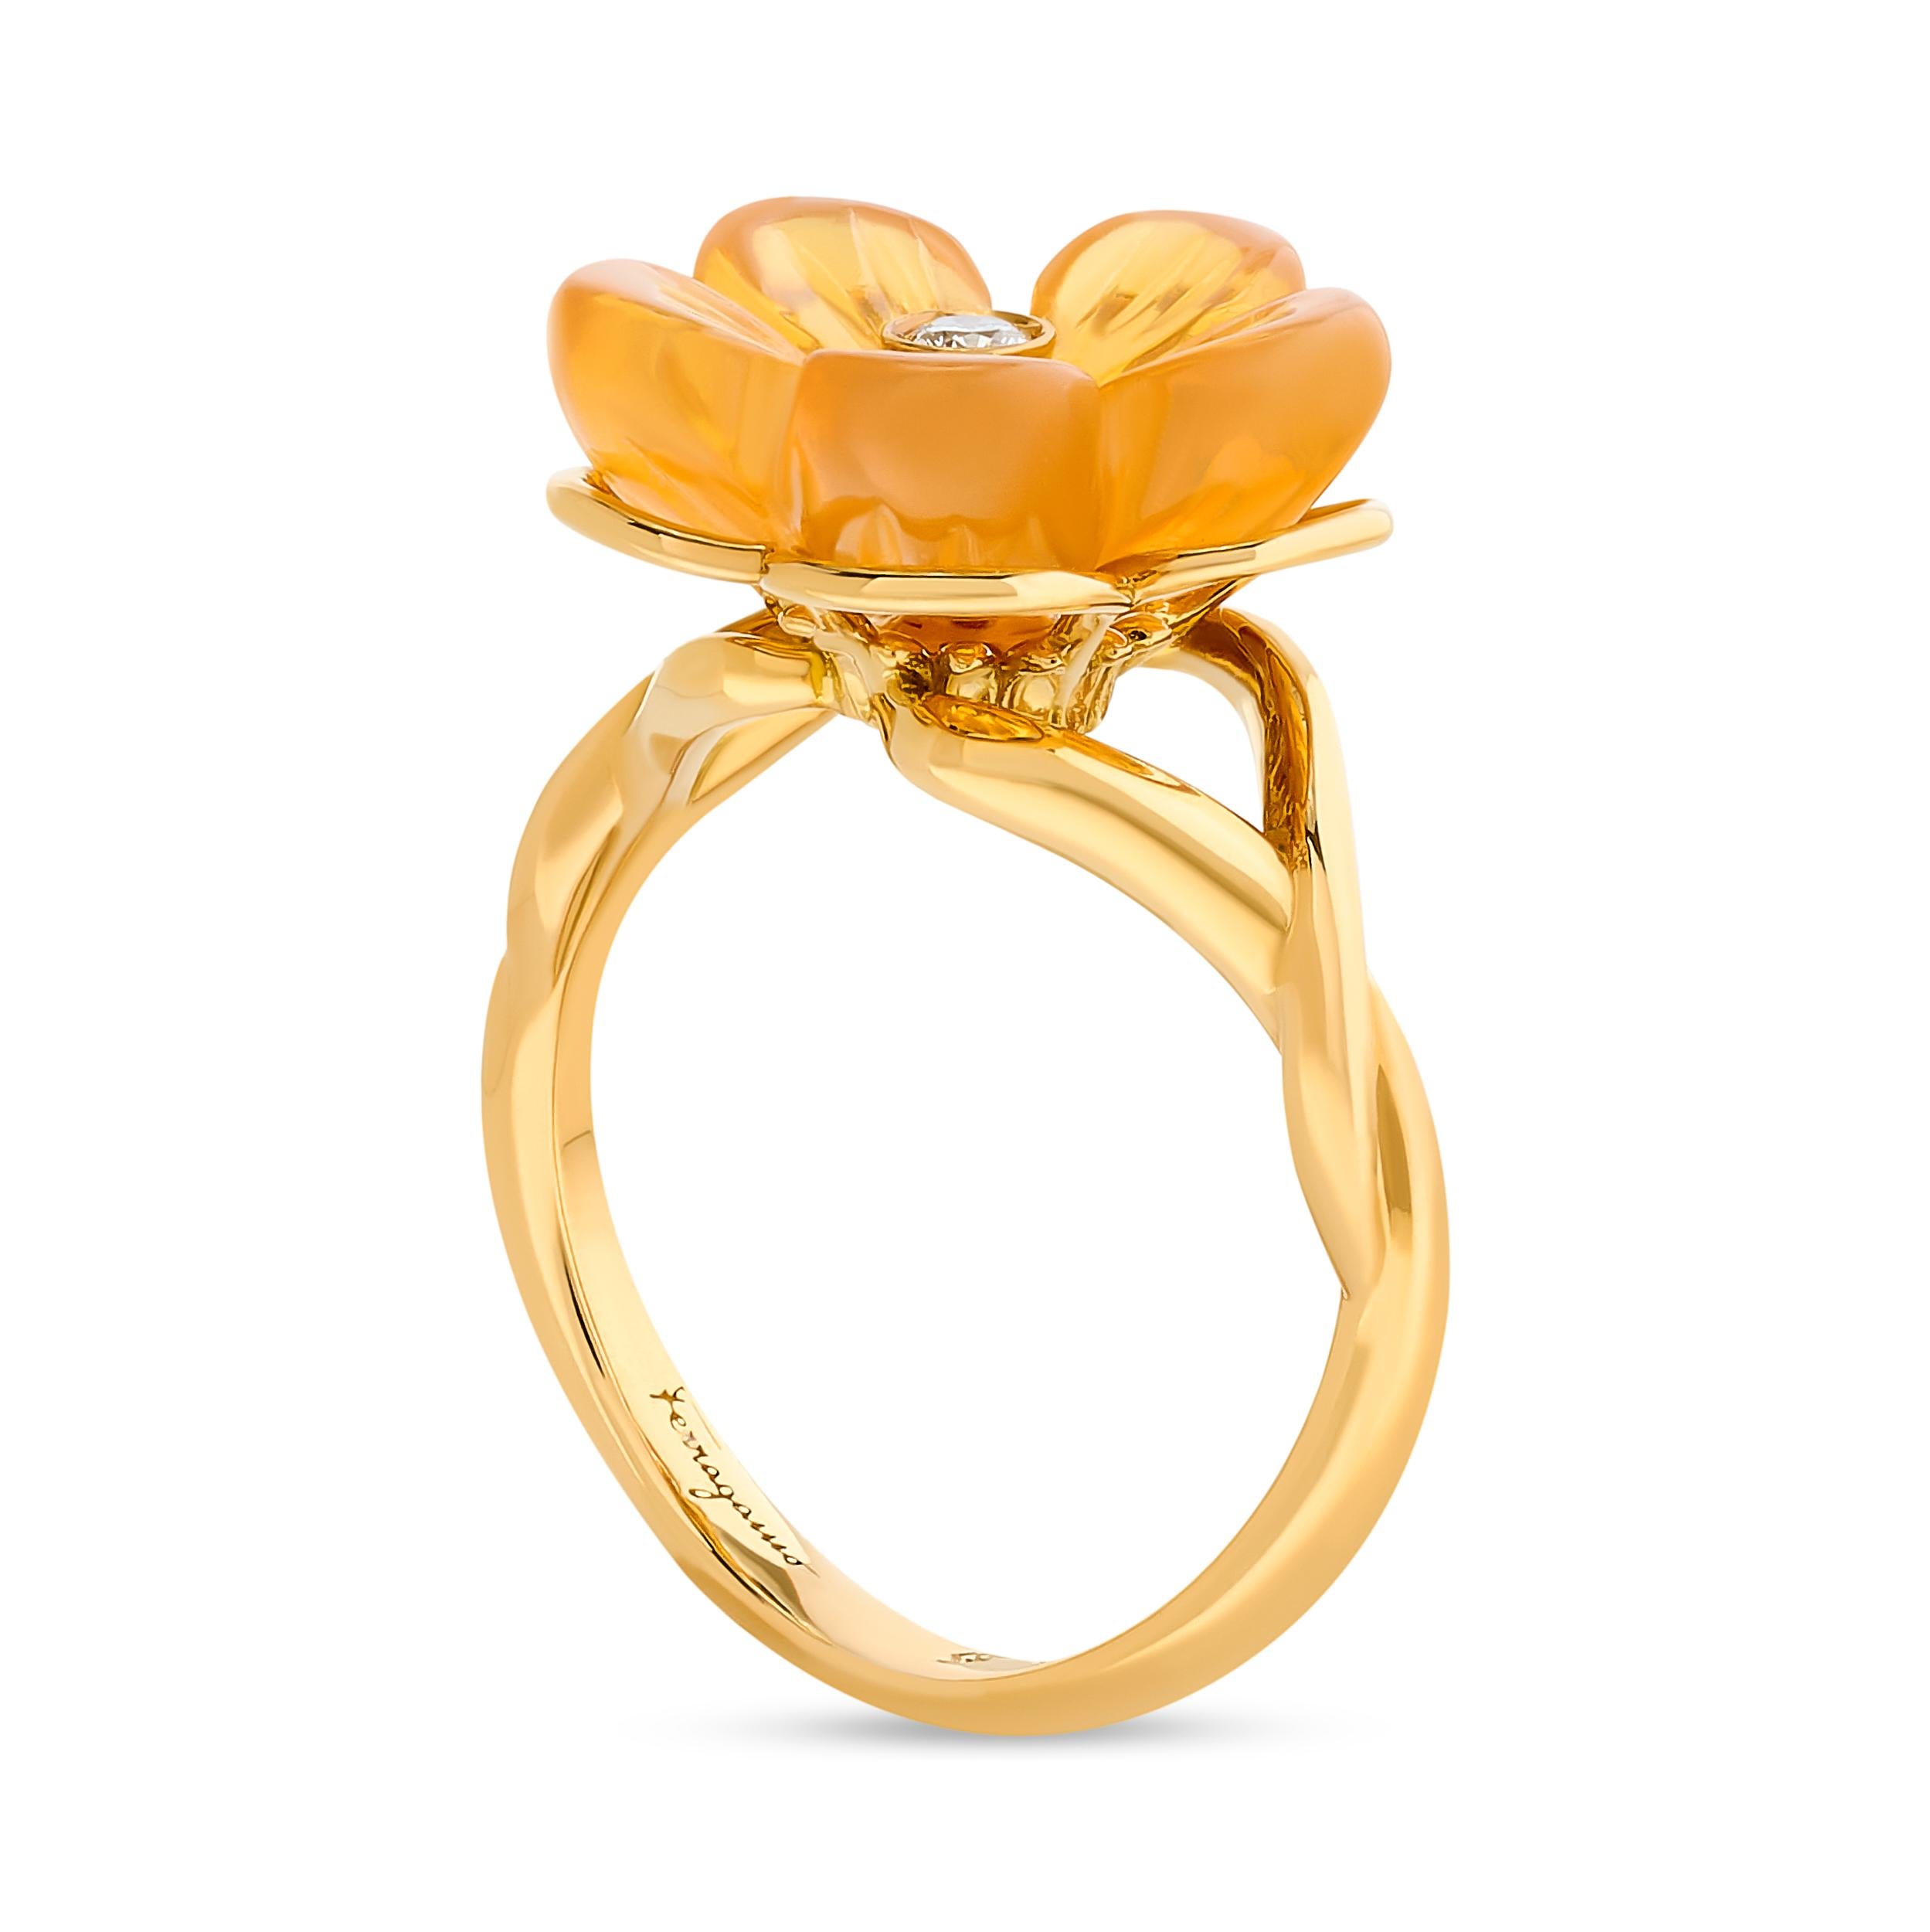 This exquisite 18 karat Ferragamo ring features a captivating floral design with carved, delicate fire opal petals that gently curve around a diamond center.
The center round diamond weighs approximately 0.04 carat with an H color and VS clarity